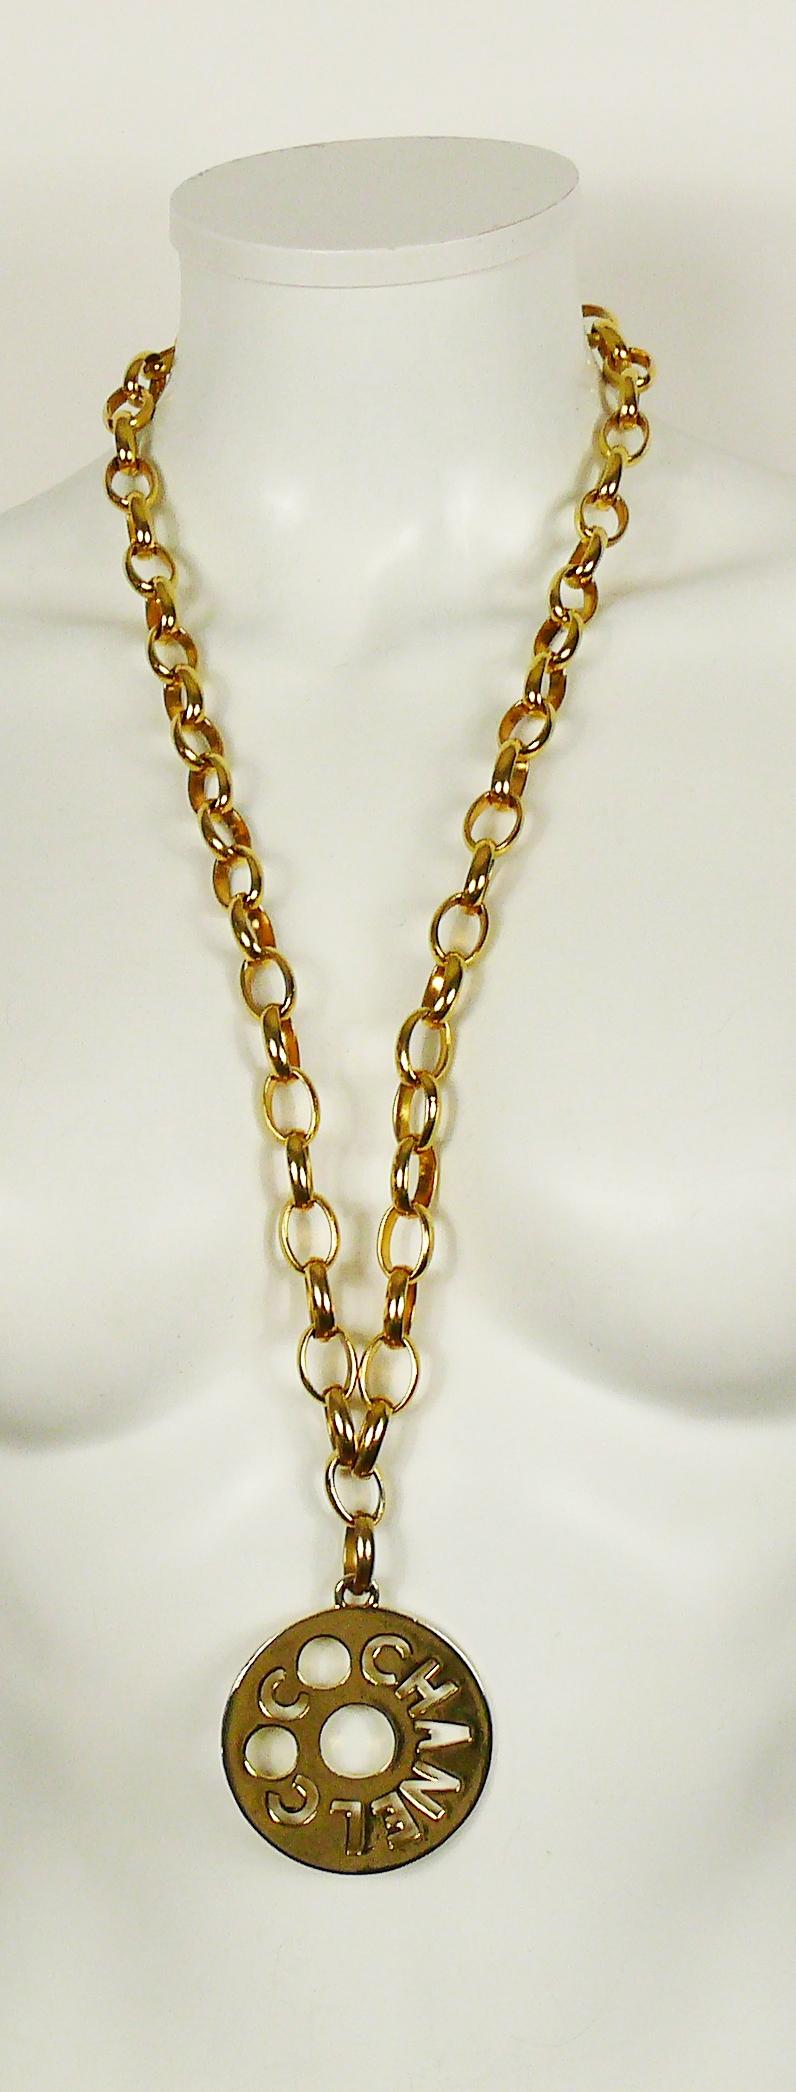 CHANEL vintage gold toned long chunky link chain necklace featuring a massive COCO CHANEL cutout openwork medallion pendant.

Can be used as a single/double strand necklace or as a belt.

Hook closure.
Adjustable length.

Embossed CHANEL on the